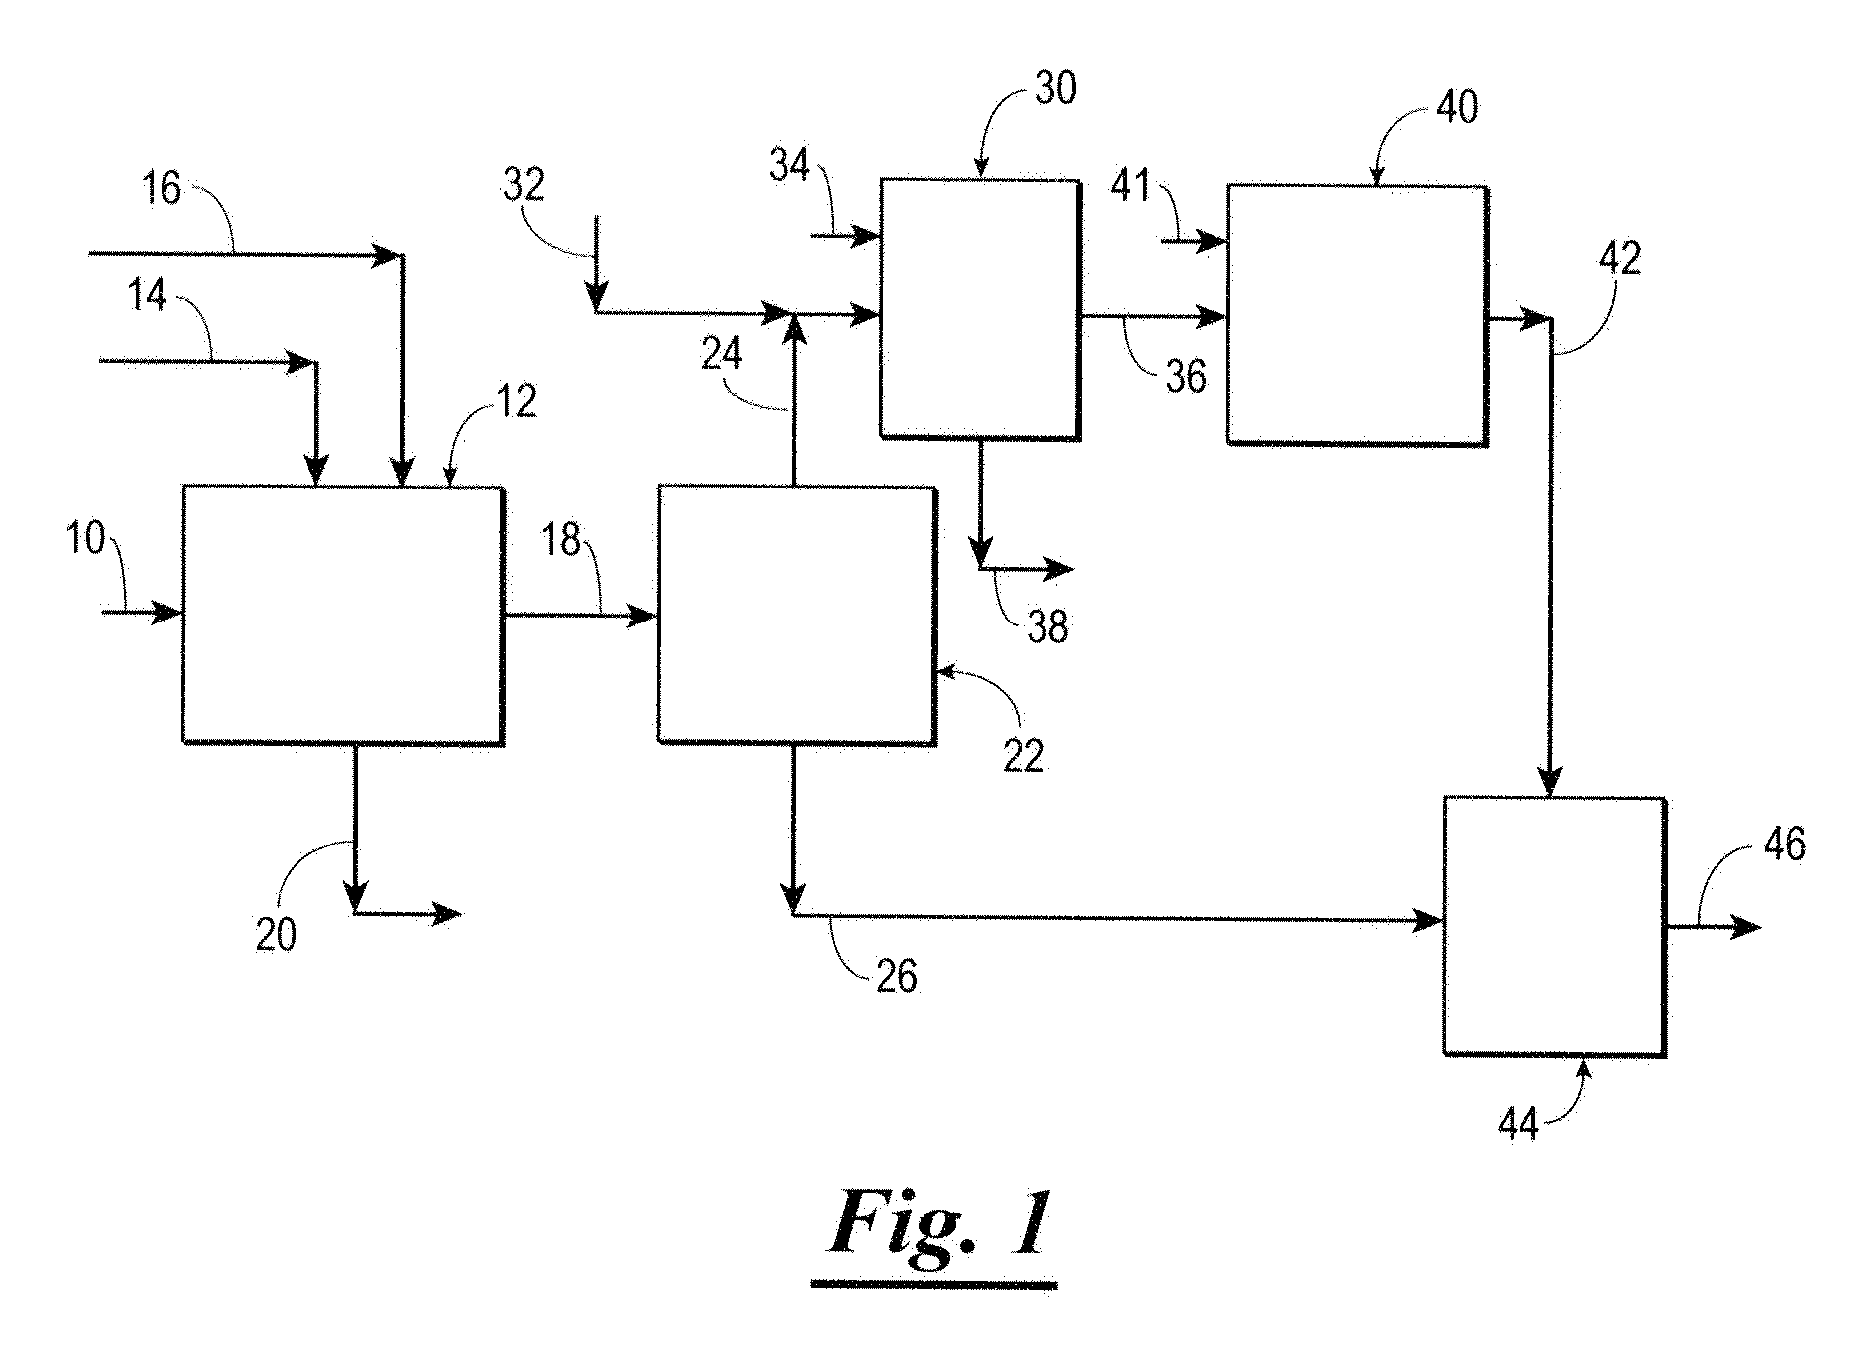 Process for producing bio-derived fuel with alkyl ester and iso-paraffin components